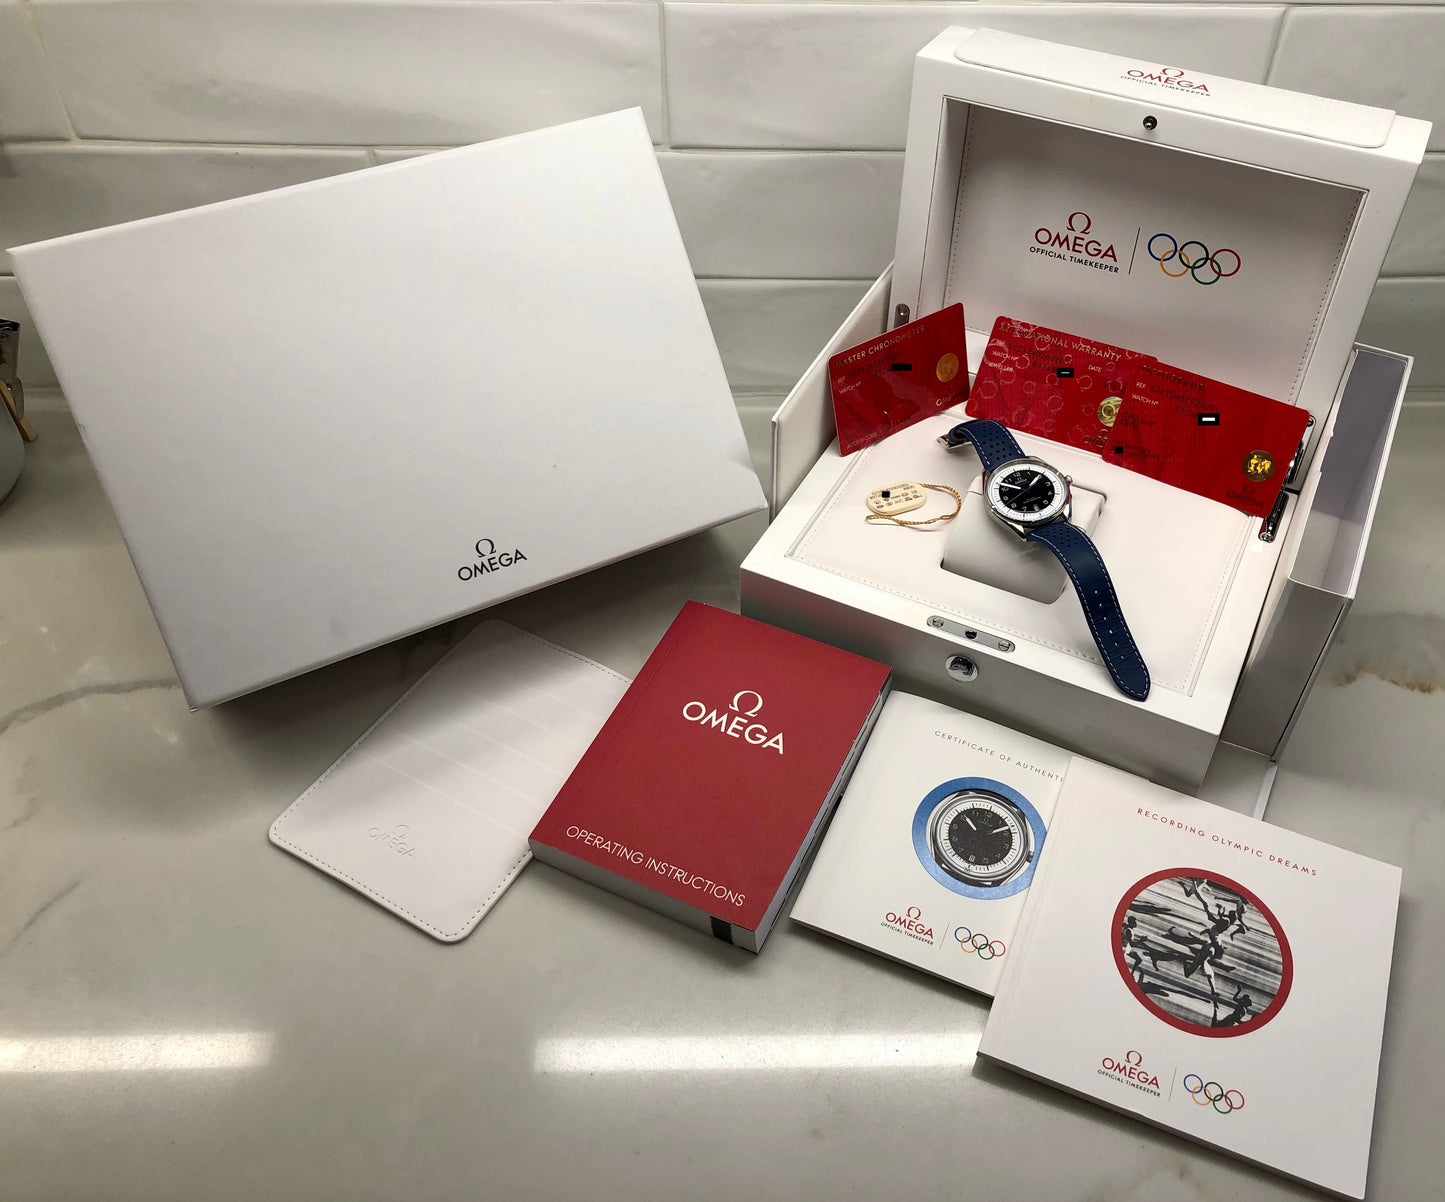 Omega Seamaster Olympic Time Keeper Limited Edition 522.32.40.20.01.001 Steel Mens Wristwatch with Box and Papers - HASHTAGWATCHCO